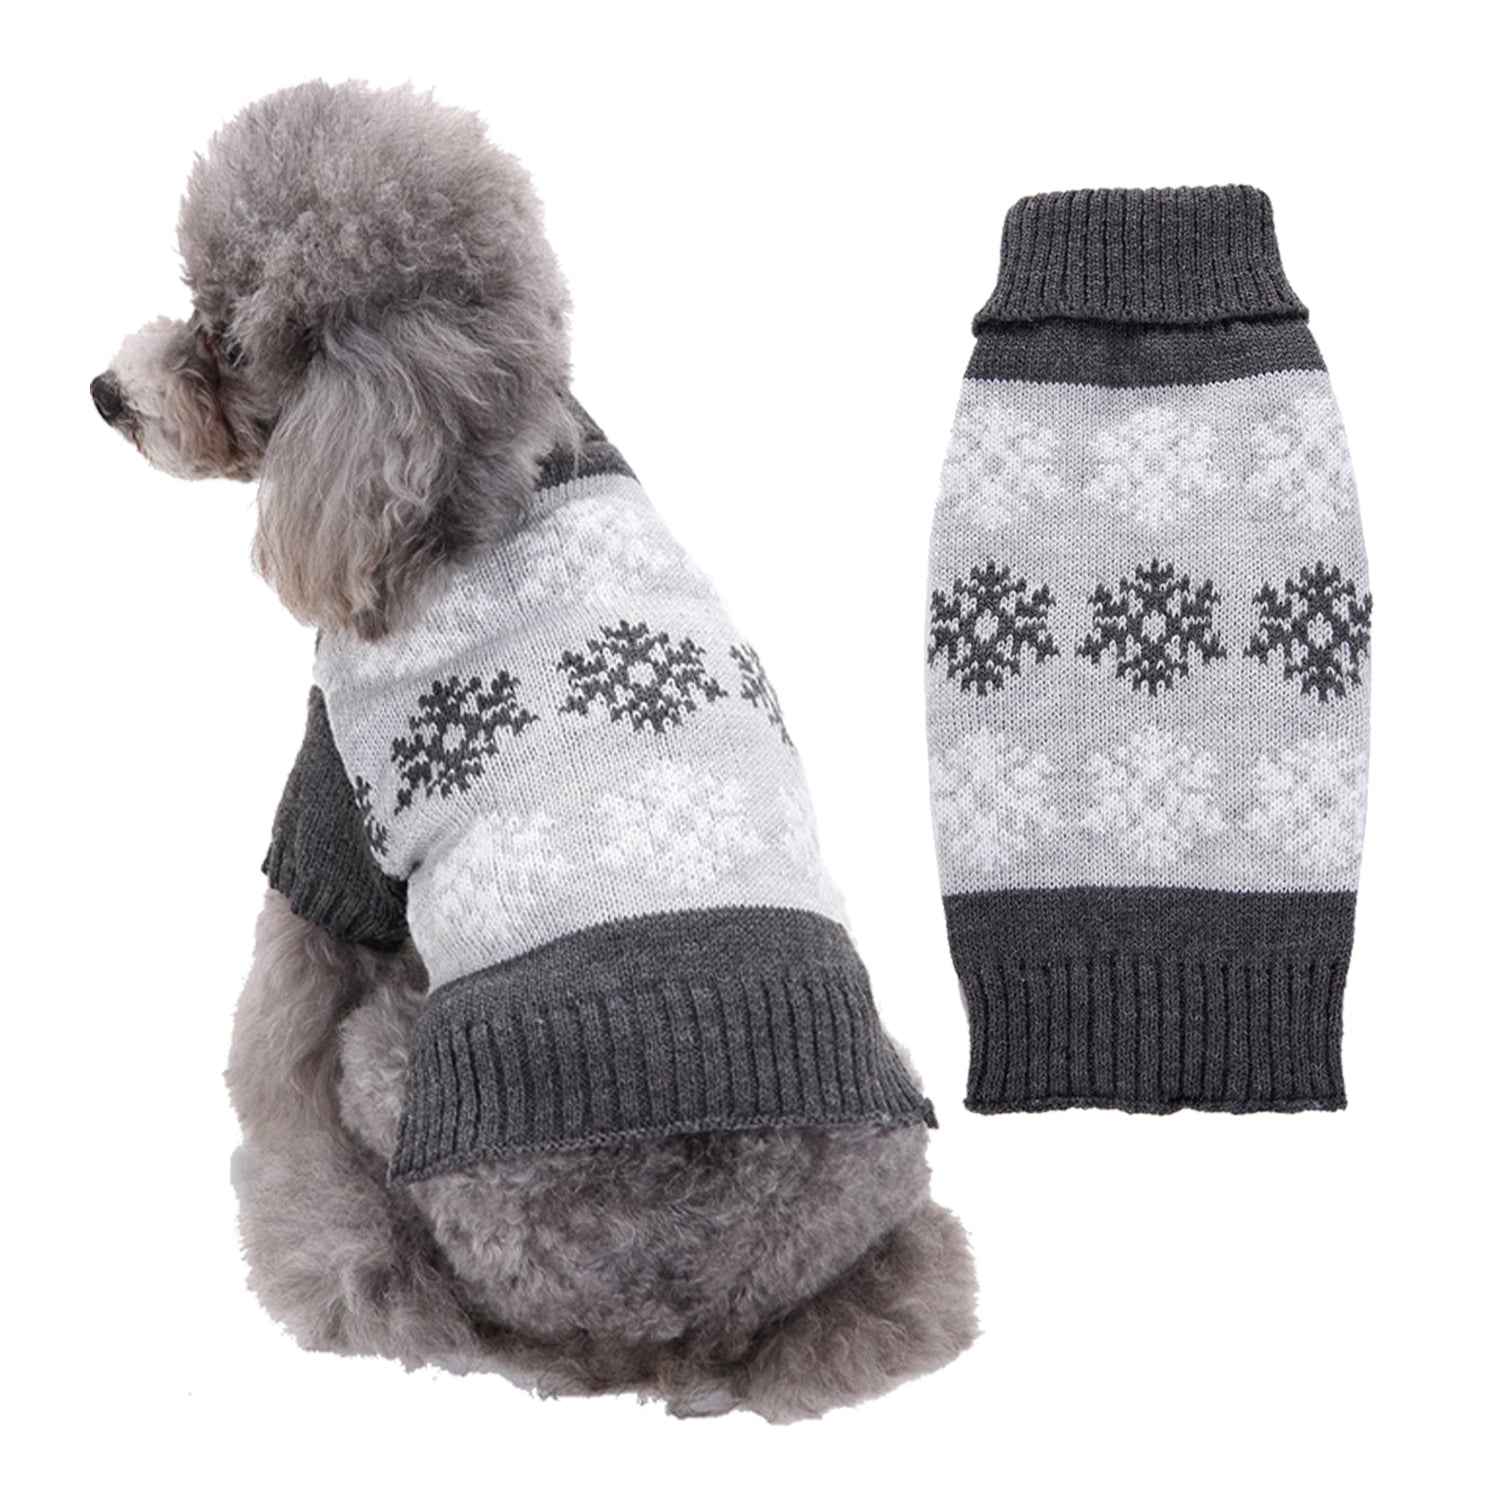 Classic Knitwear Dog Winter Coat Outfits for Small Medium Large Dogs Warm /& Comfortable Dog Cold Weather Clothes with Snowflake Pattern KOOLTAIL Cable Knit Dog Sweater Turtleneck